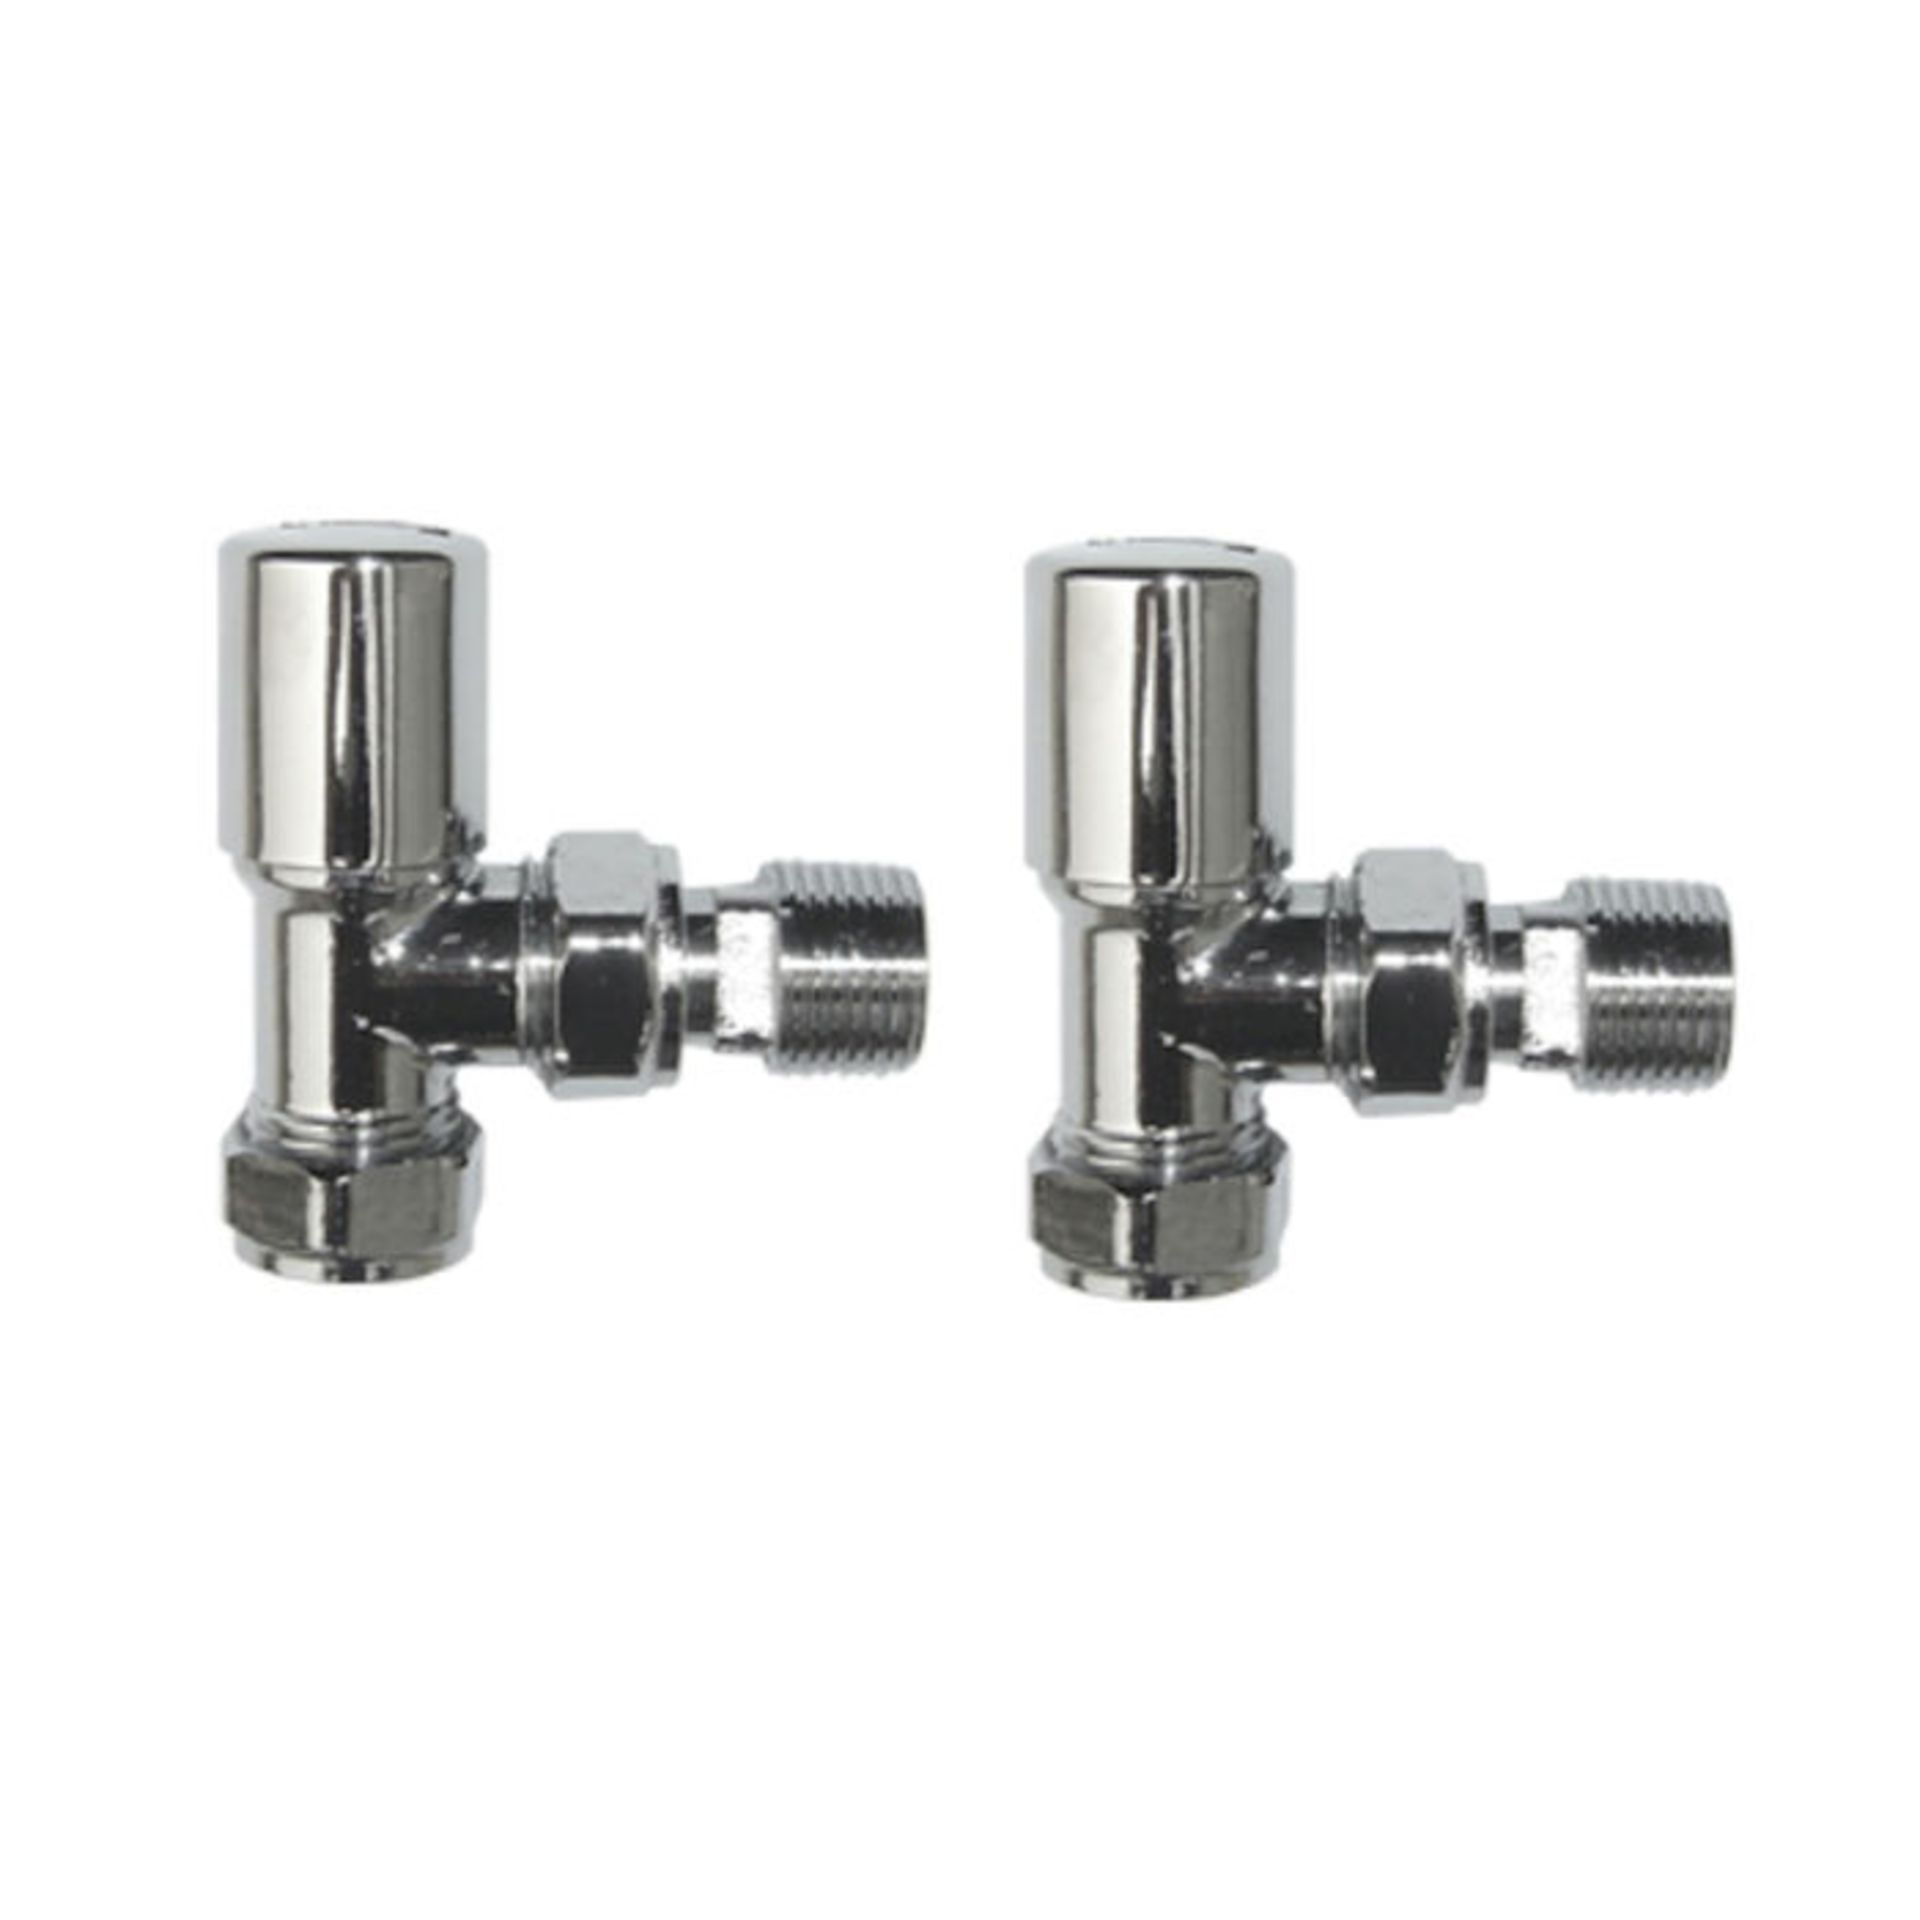 (TS145) Standard 15mm Connection Angled Chrome Radiator Valves Chrome Plated Solid Brass Angled